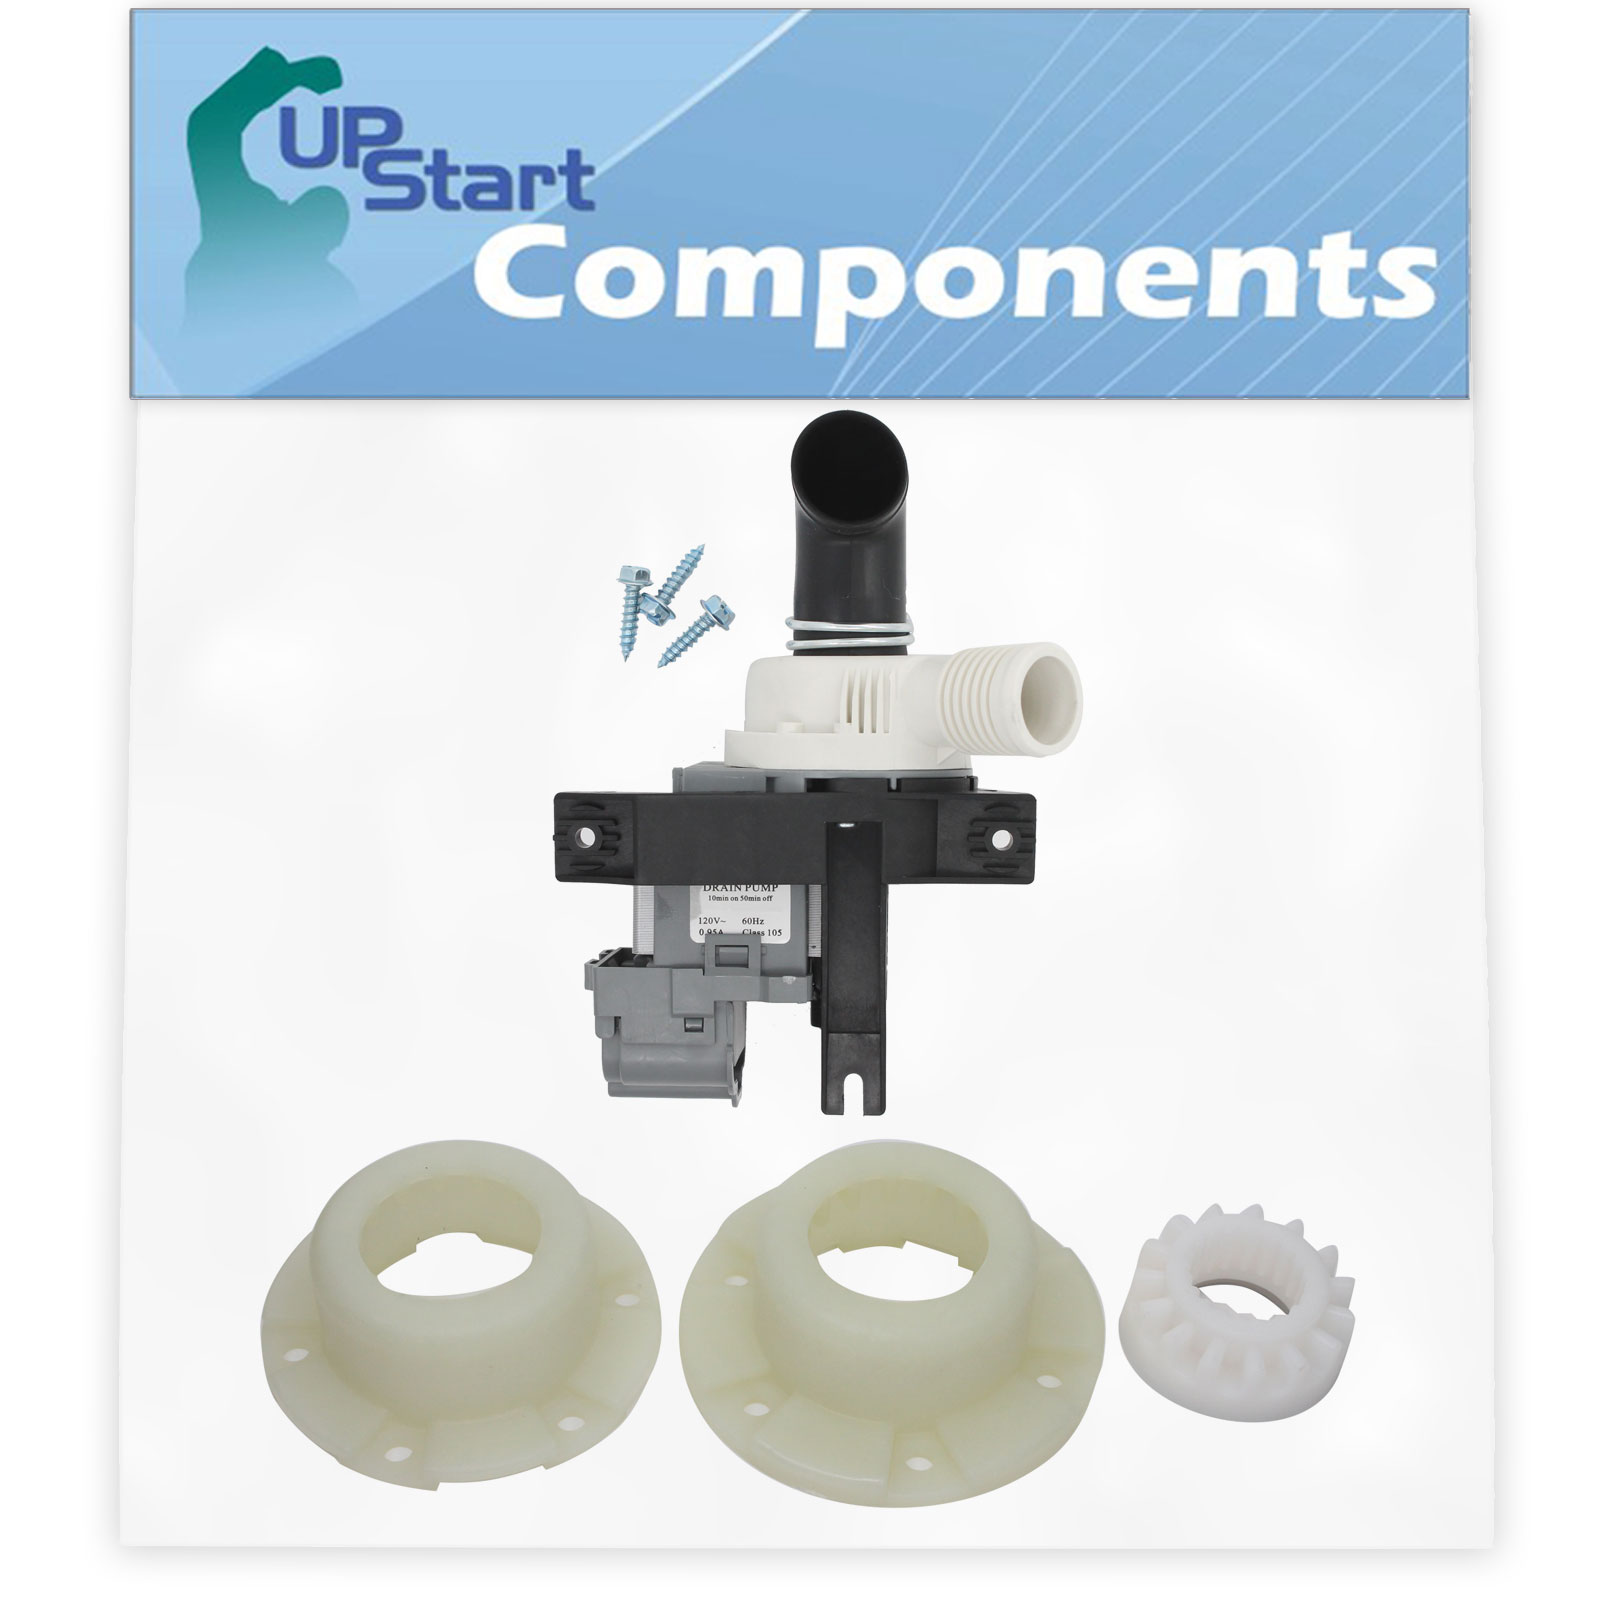 W10536347 Washer Drain Pump & 280145 Hub Kit Replacement for Whirlpool WTW7800XB2 Washing Machine - Compatible with W10217134 Water Pump & W10820039 Basket Hub Kit - UpStart Components Brand - image 1 of 4